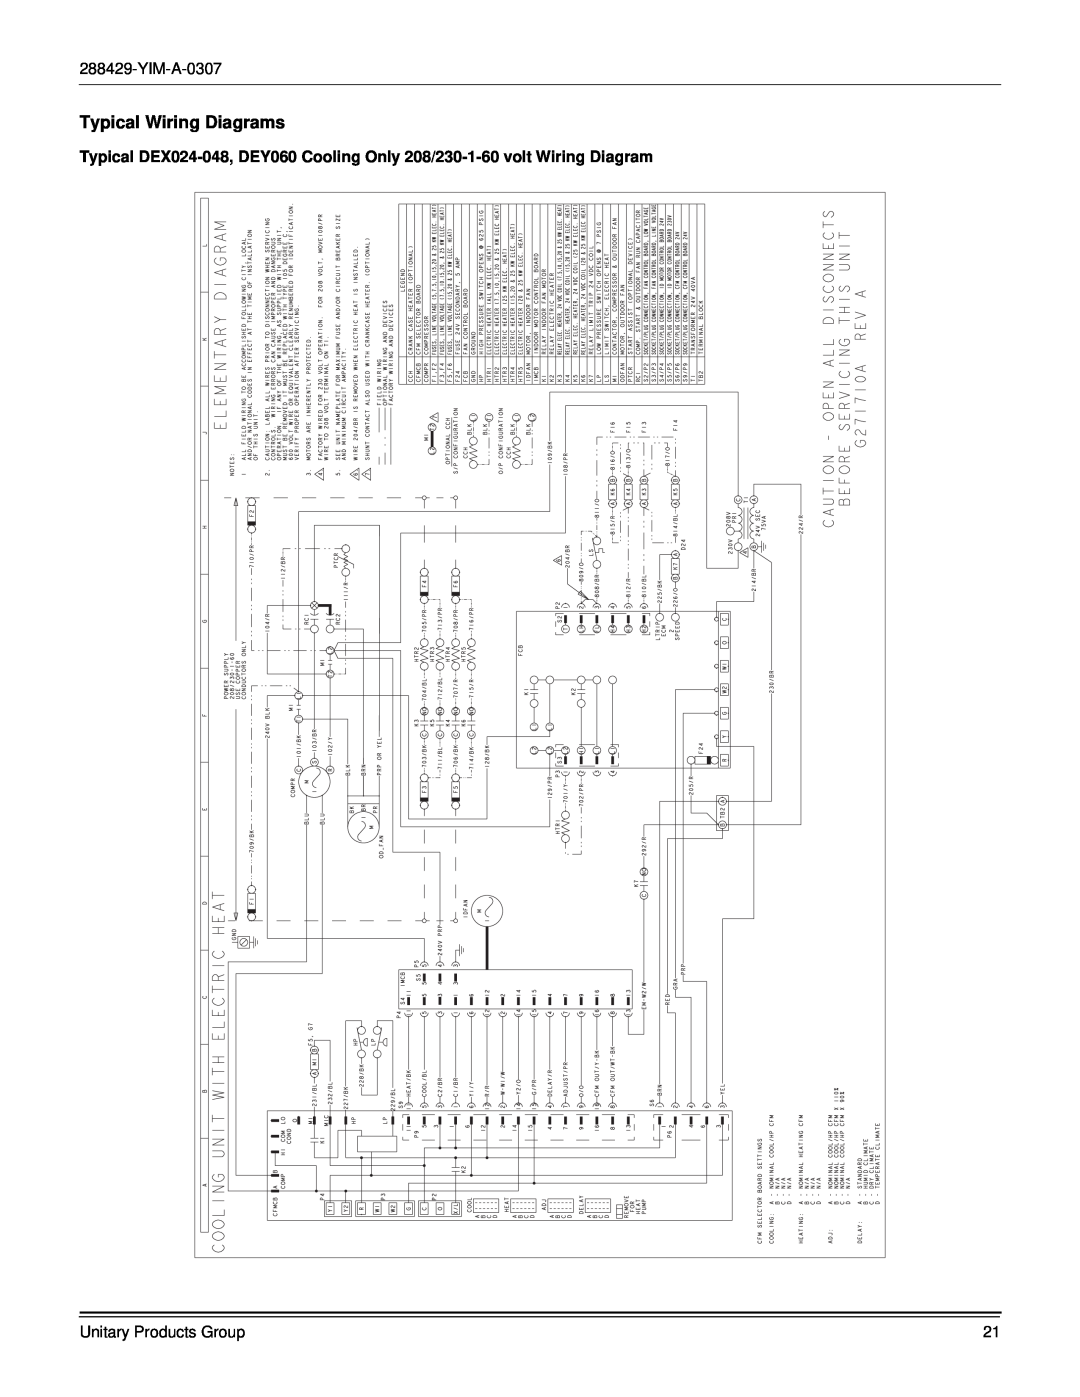 York R-410A dimensions Typical Wiring Diagrams 